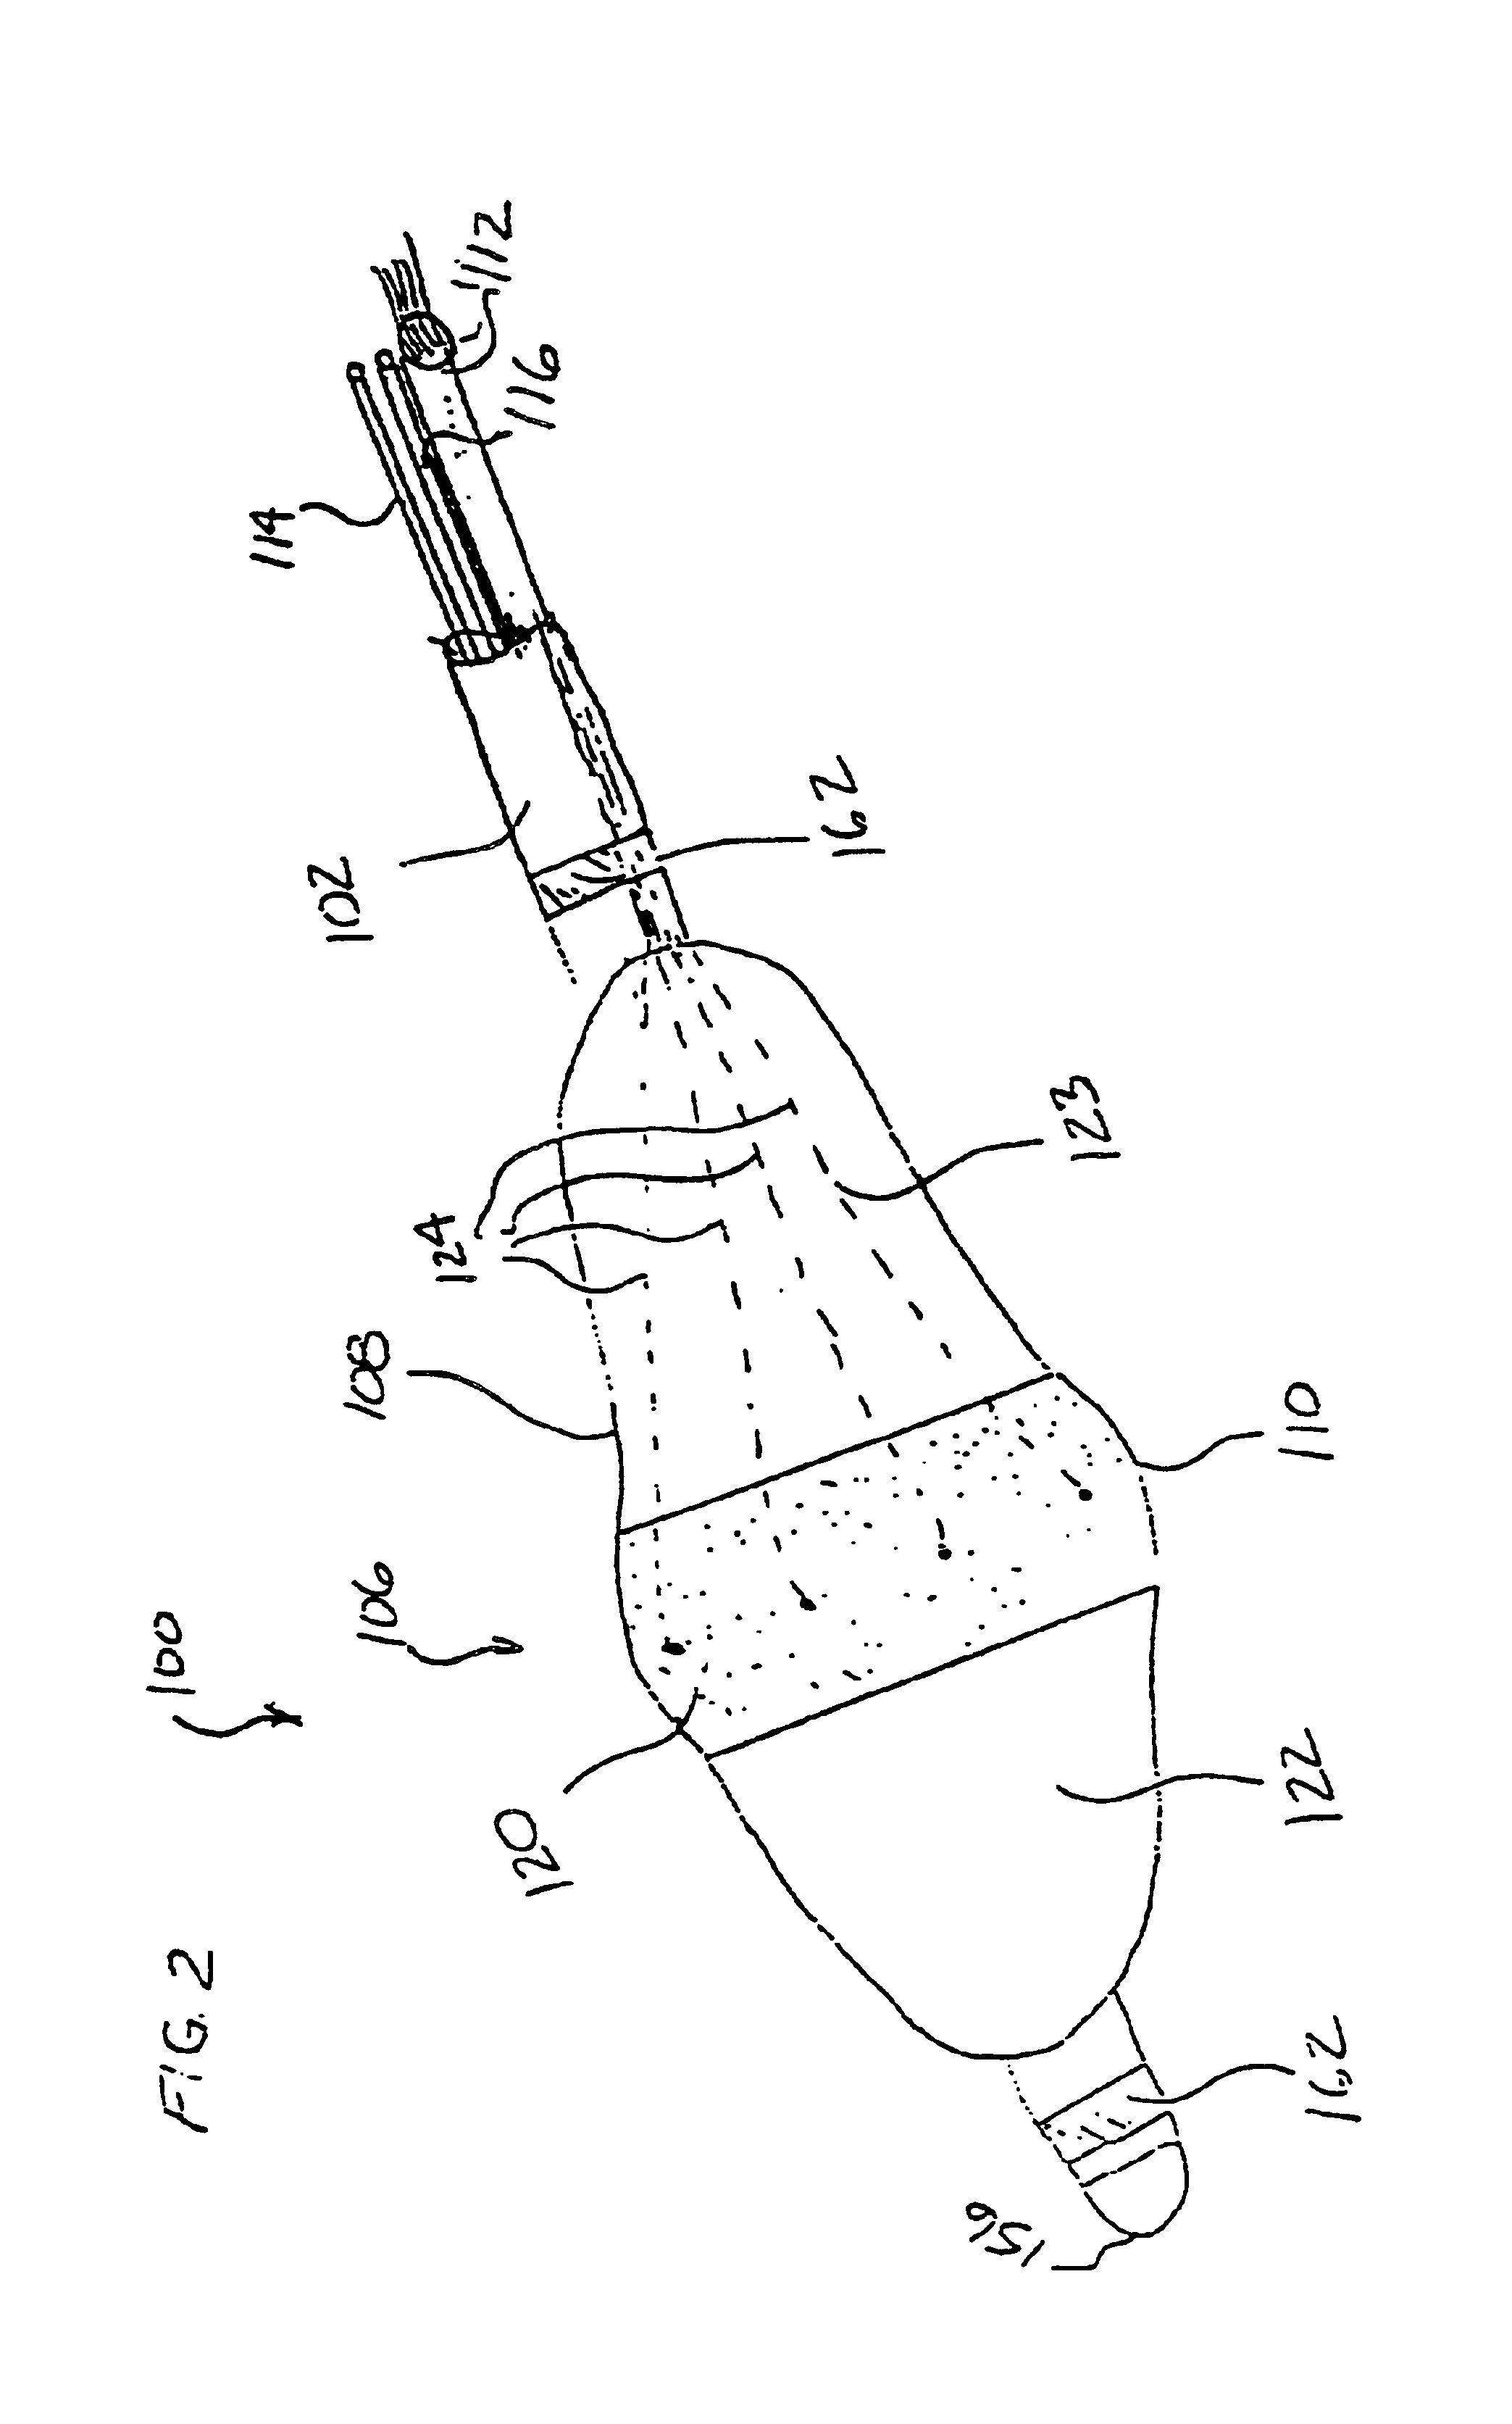 Devices and methods for creating lesions in endocardial and surrounding tissue to isolate focal arrhythmia substrates